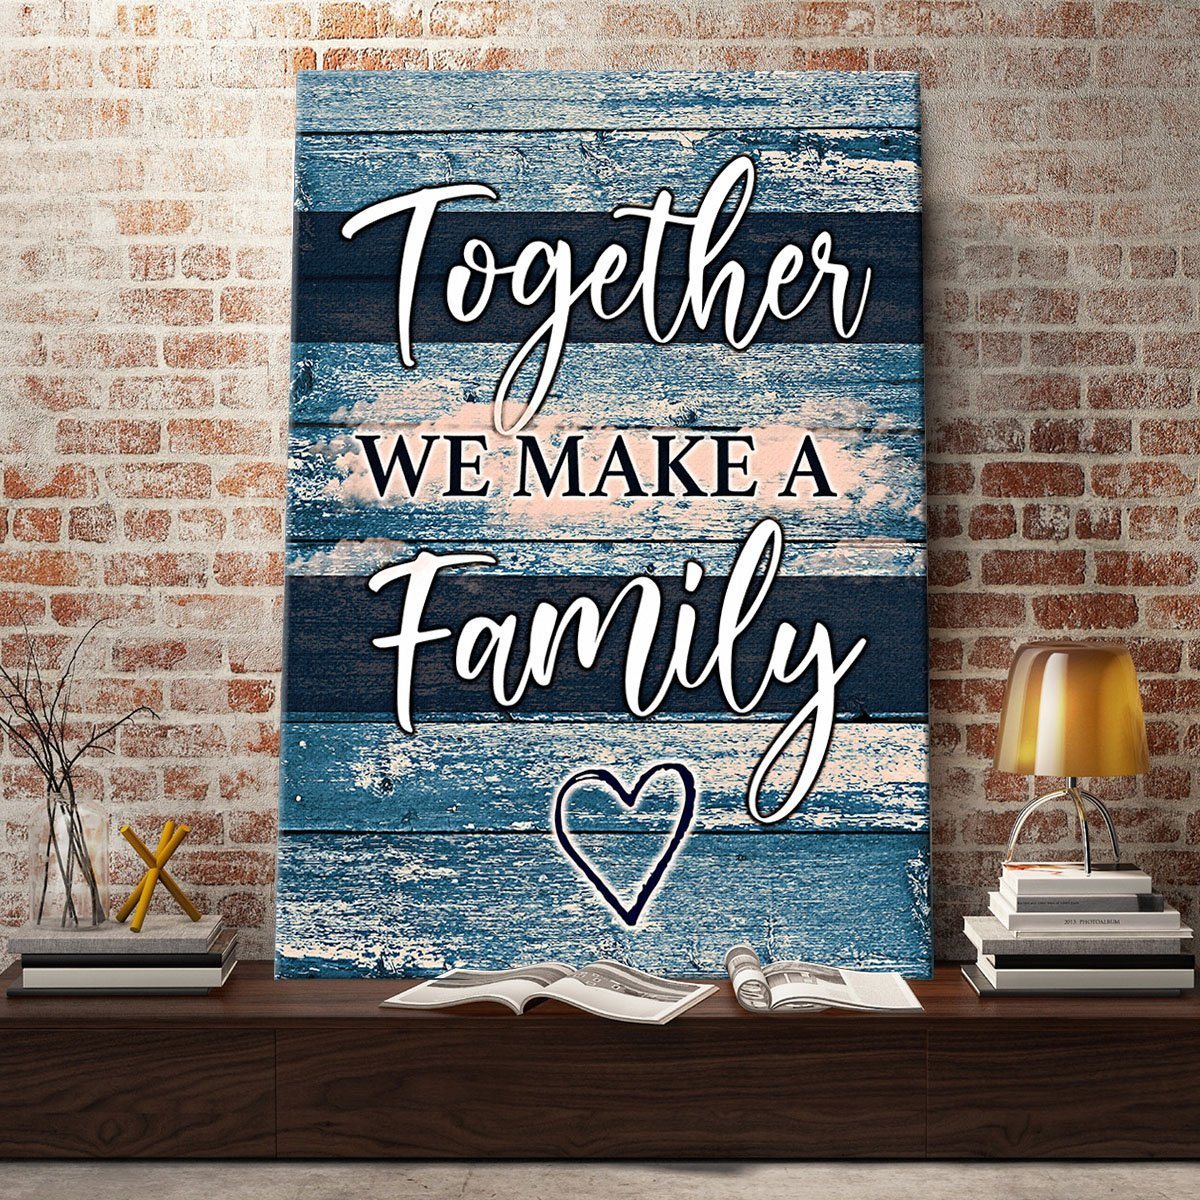 Together We Make A Family